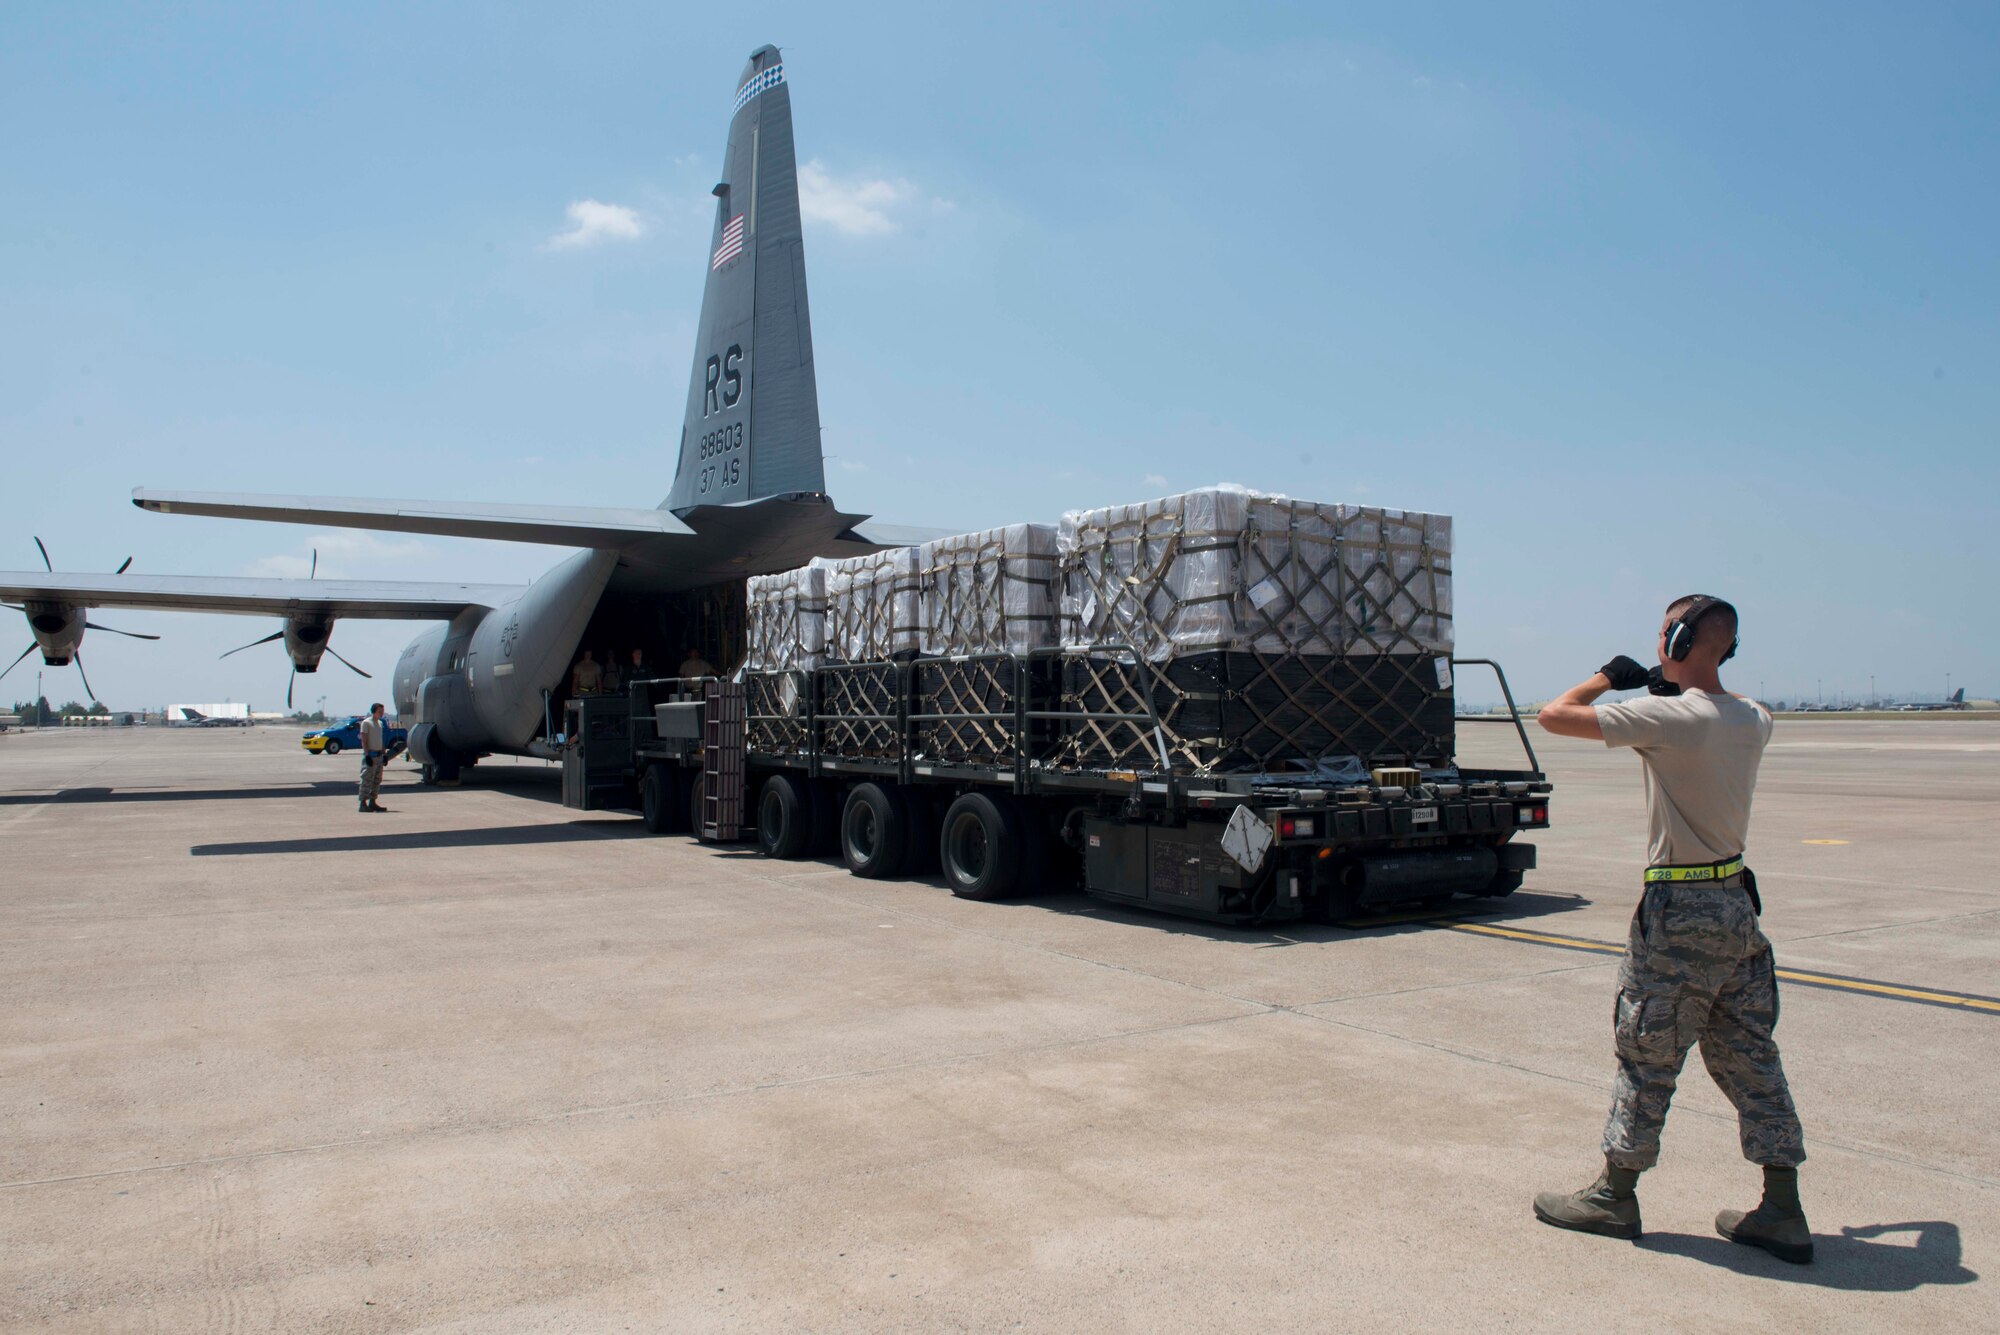 An Airman from the 728th Air Mobility Squadron guides a truck back July 22, 2016, at Incirlik Air Base Turkey. The truck contained cargo received from a C-130J Super Hercules aircraft. (U.S. Air Force photo by Senior Airman John Nieves Camacho)